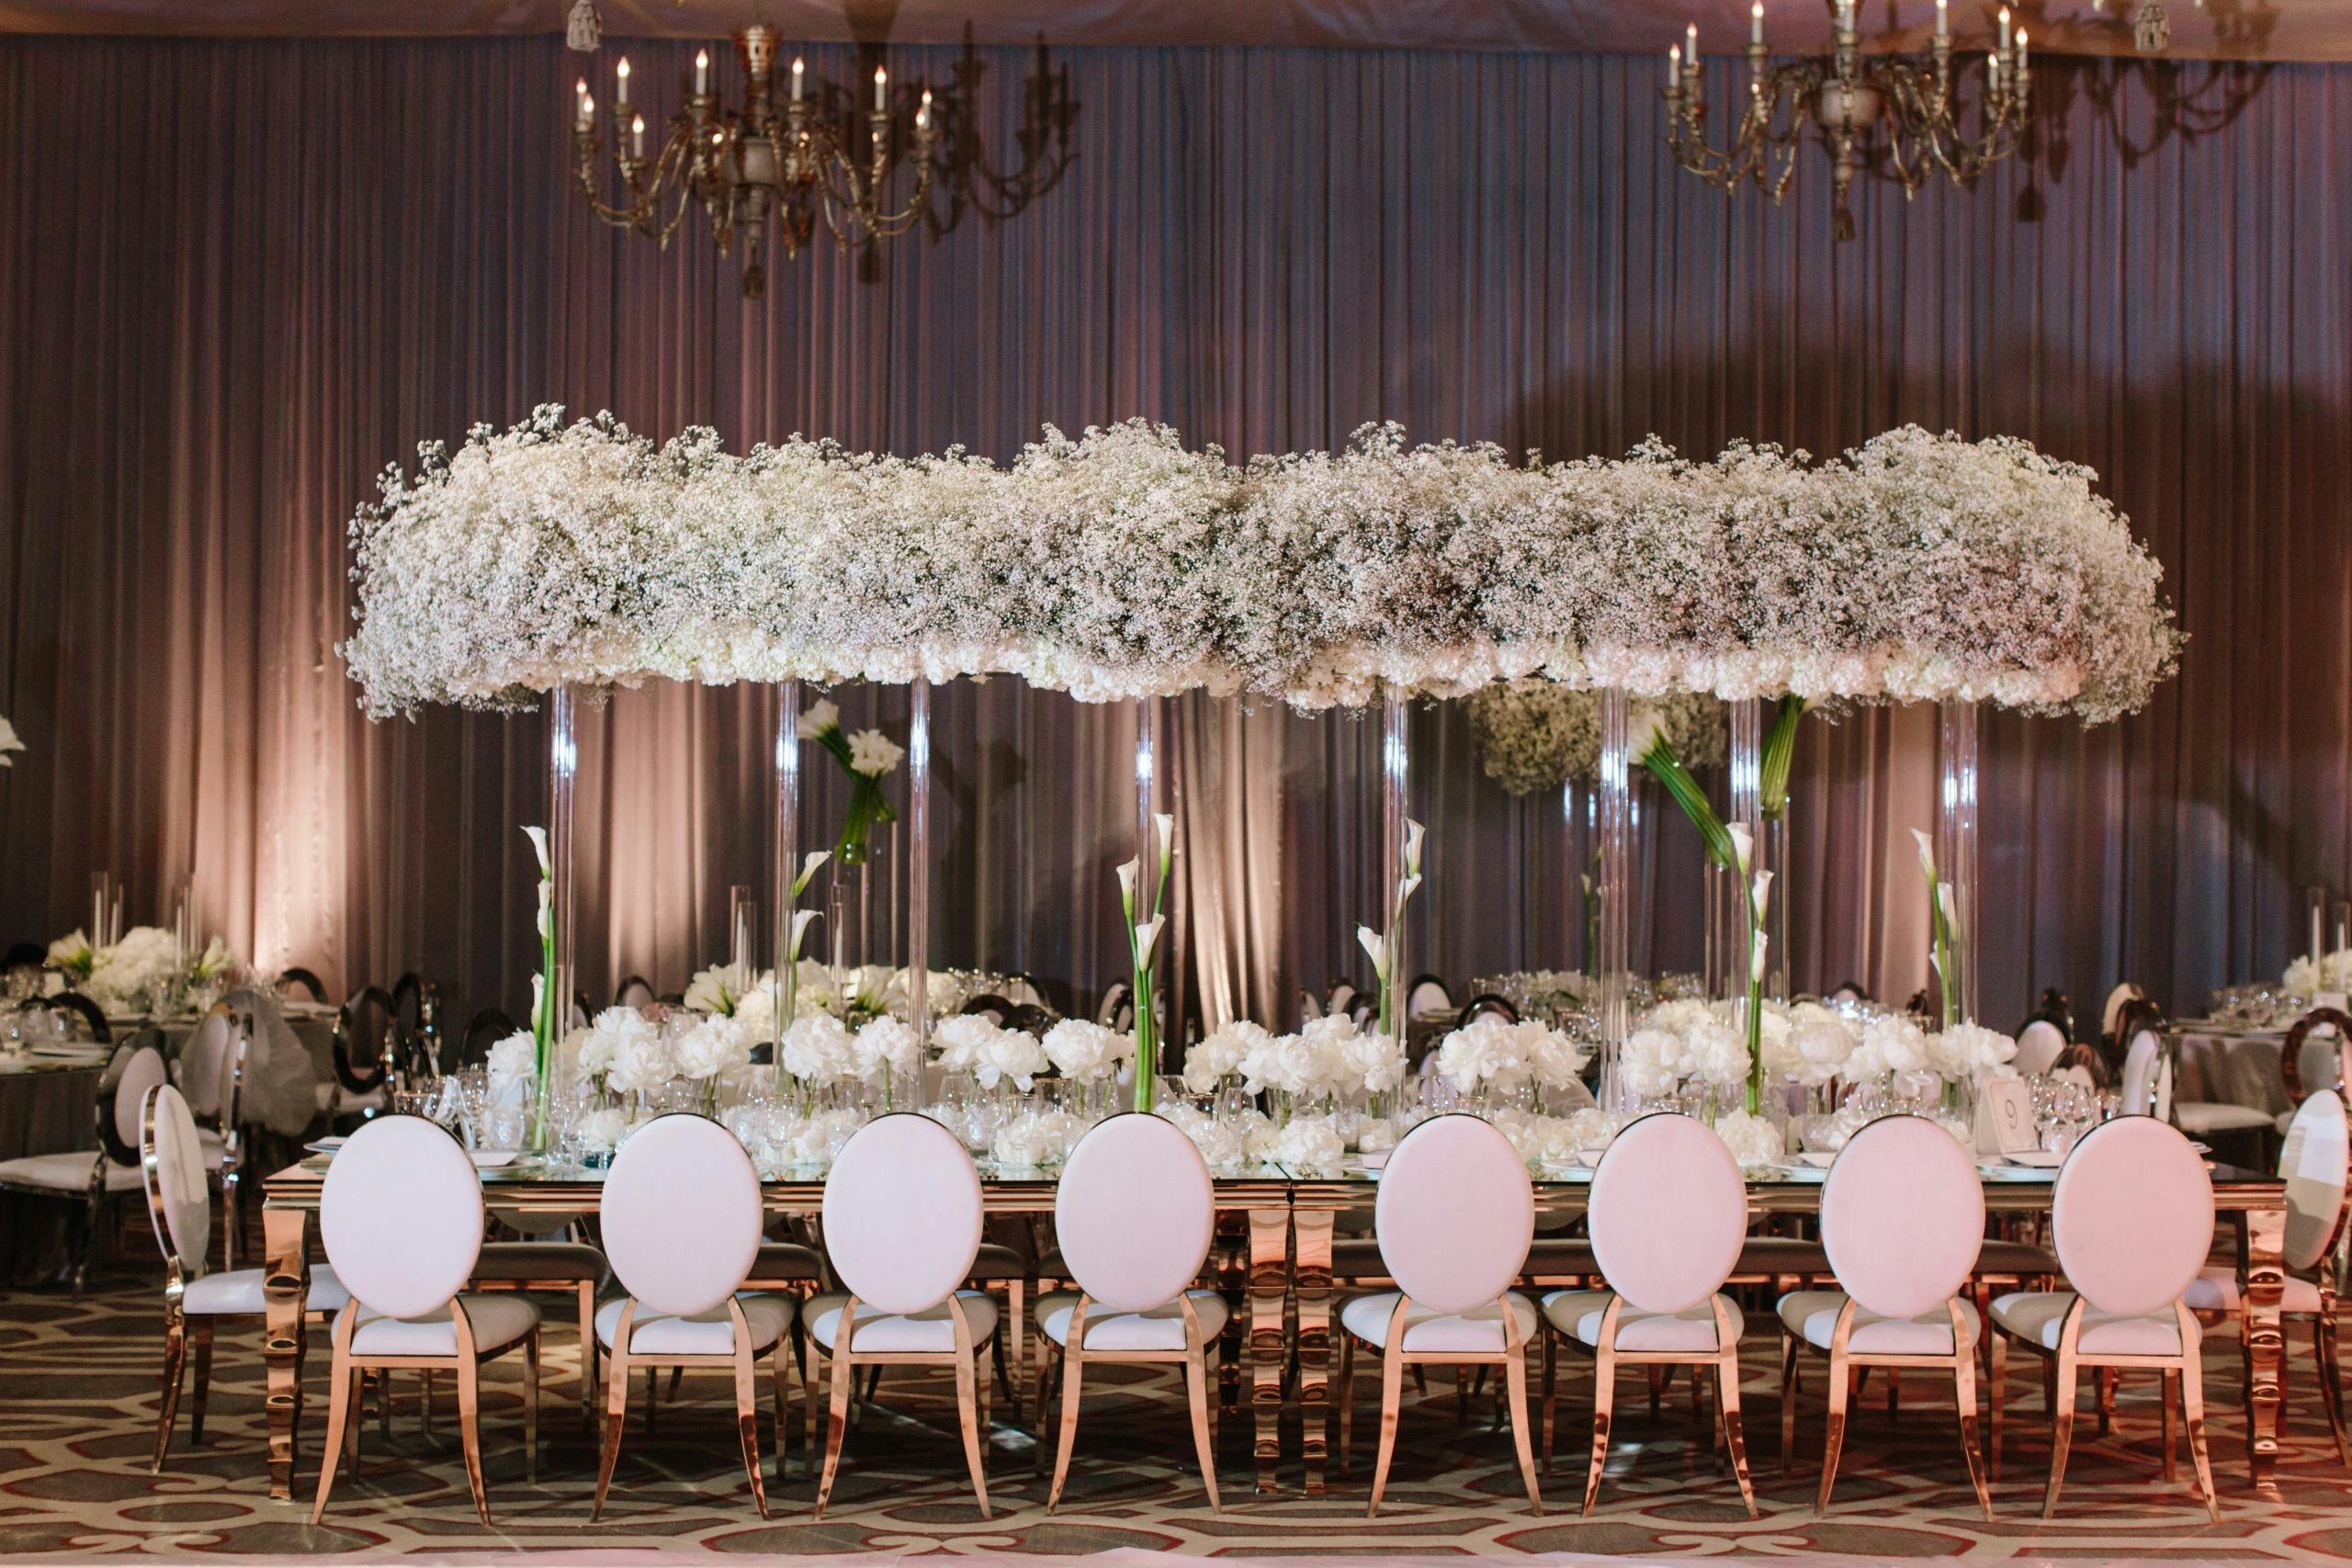 Modern, All-White Wedding Tablescape with Elevated Baby’s Breath Centerpieces | PartySlate